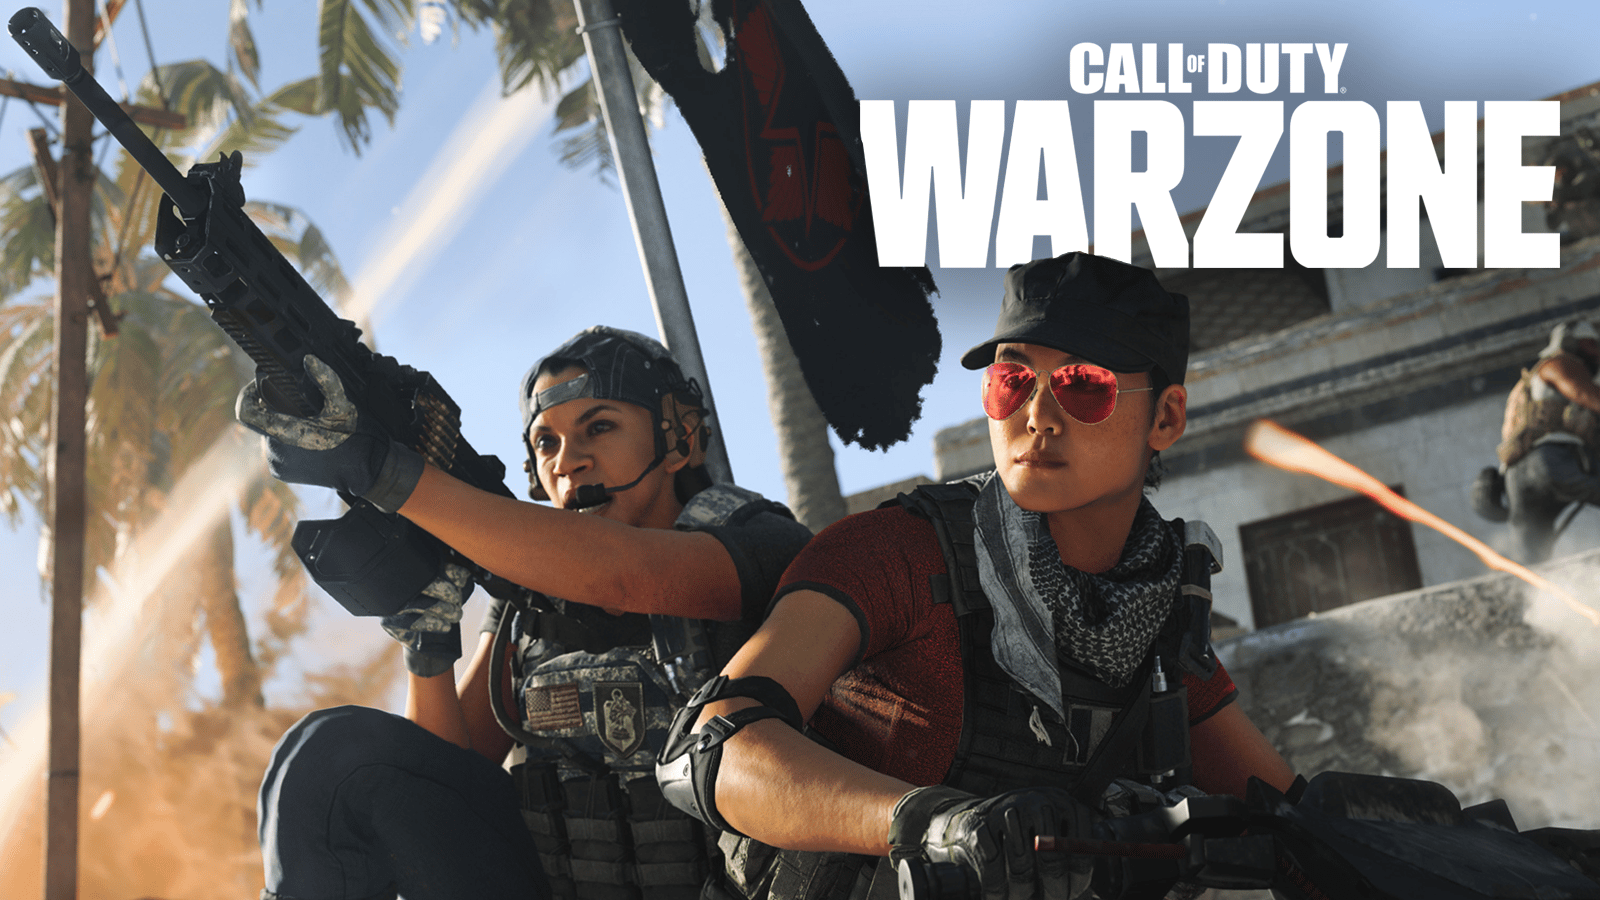 Warzone is still very much front-and-center for Call of Duty's plans, despite the 2020 release coming on-schedule.